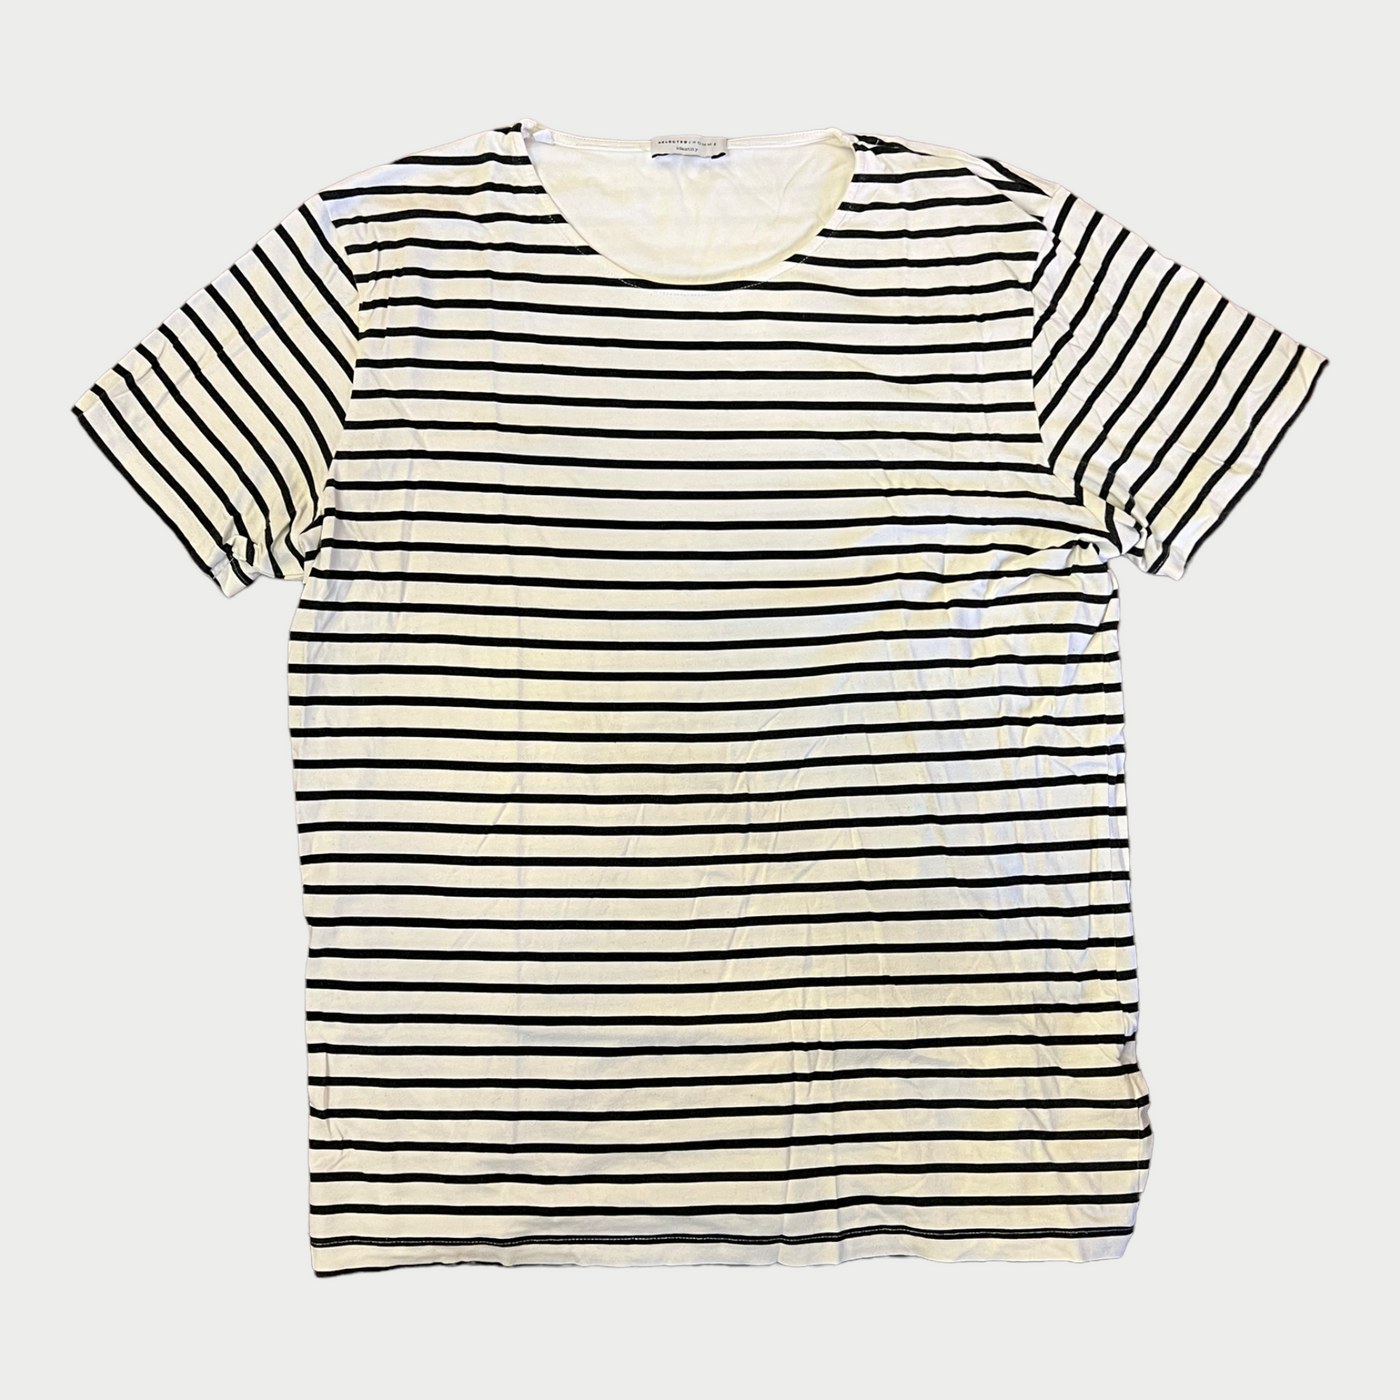 T-Shirt With Black And White Stripe Pattern Front